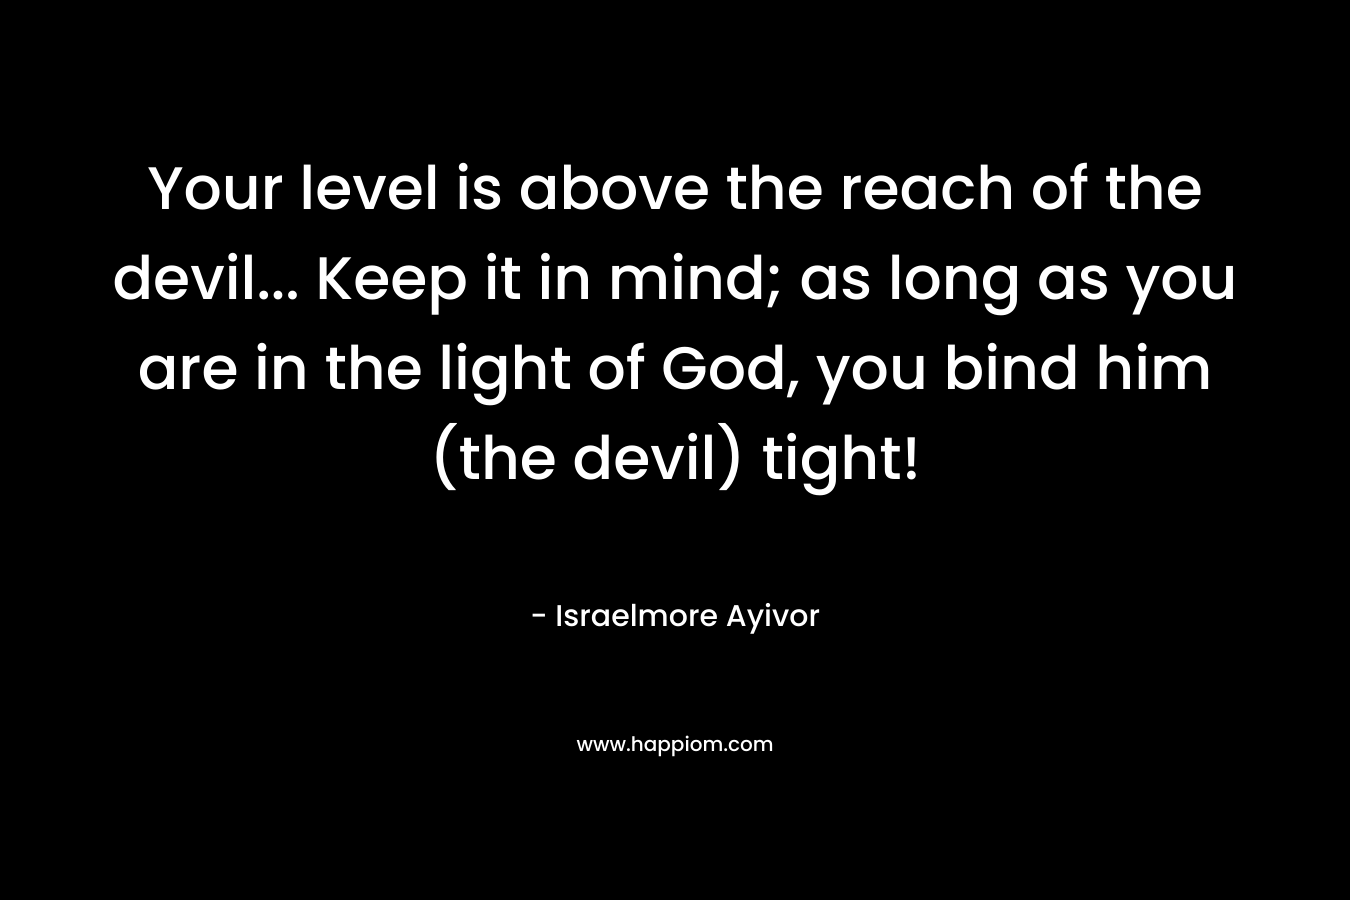 Your level is above the reach of the devil... Keep it in mind; as long as you are in the light of God, you bind him (the devil) tight!